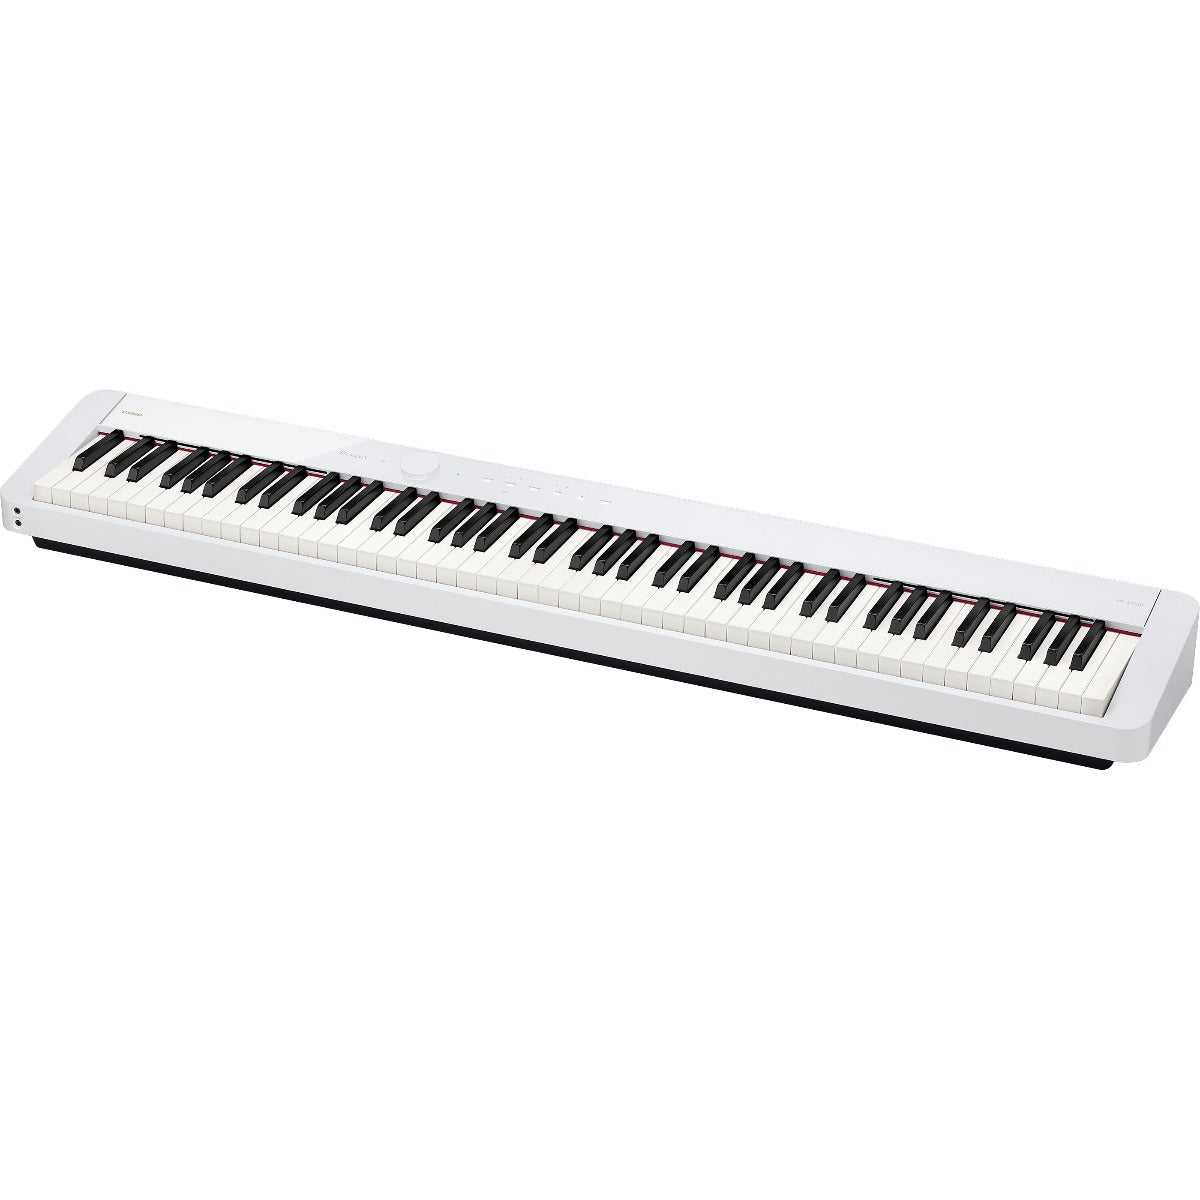 3/4 view of Casio Privia PX-S1100 Digital Piano - White showing top, front and right side